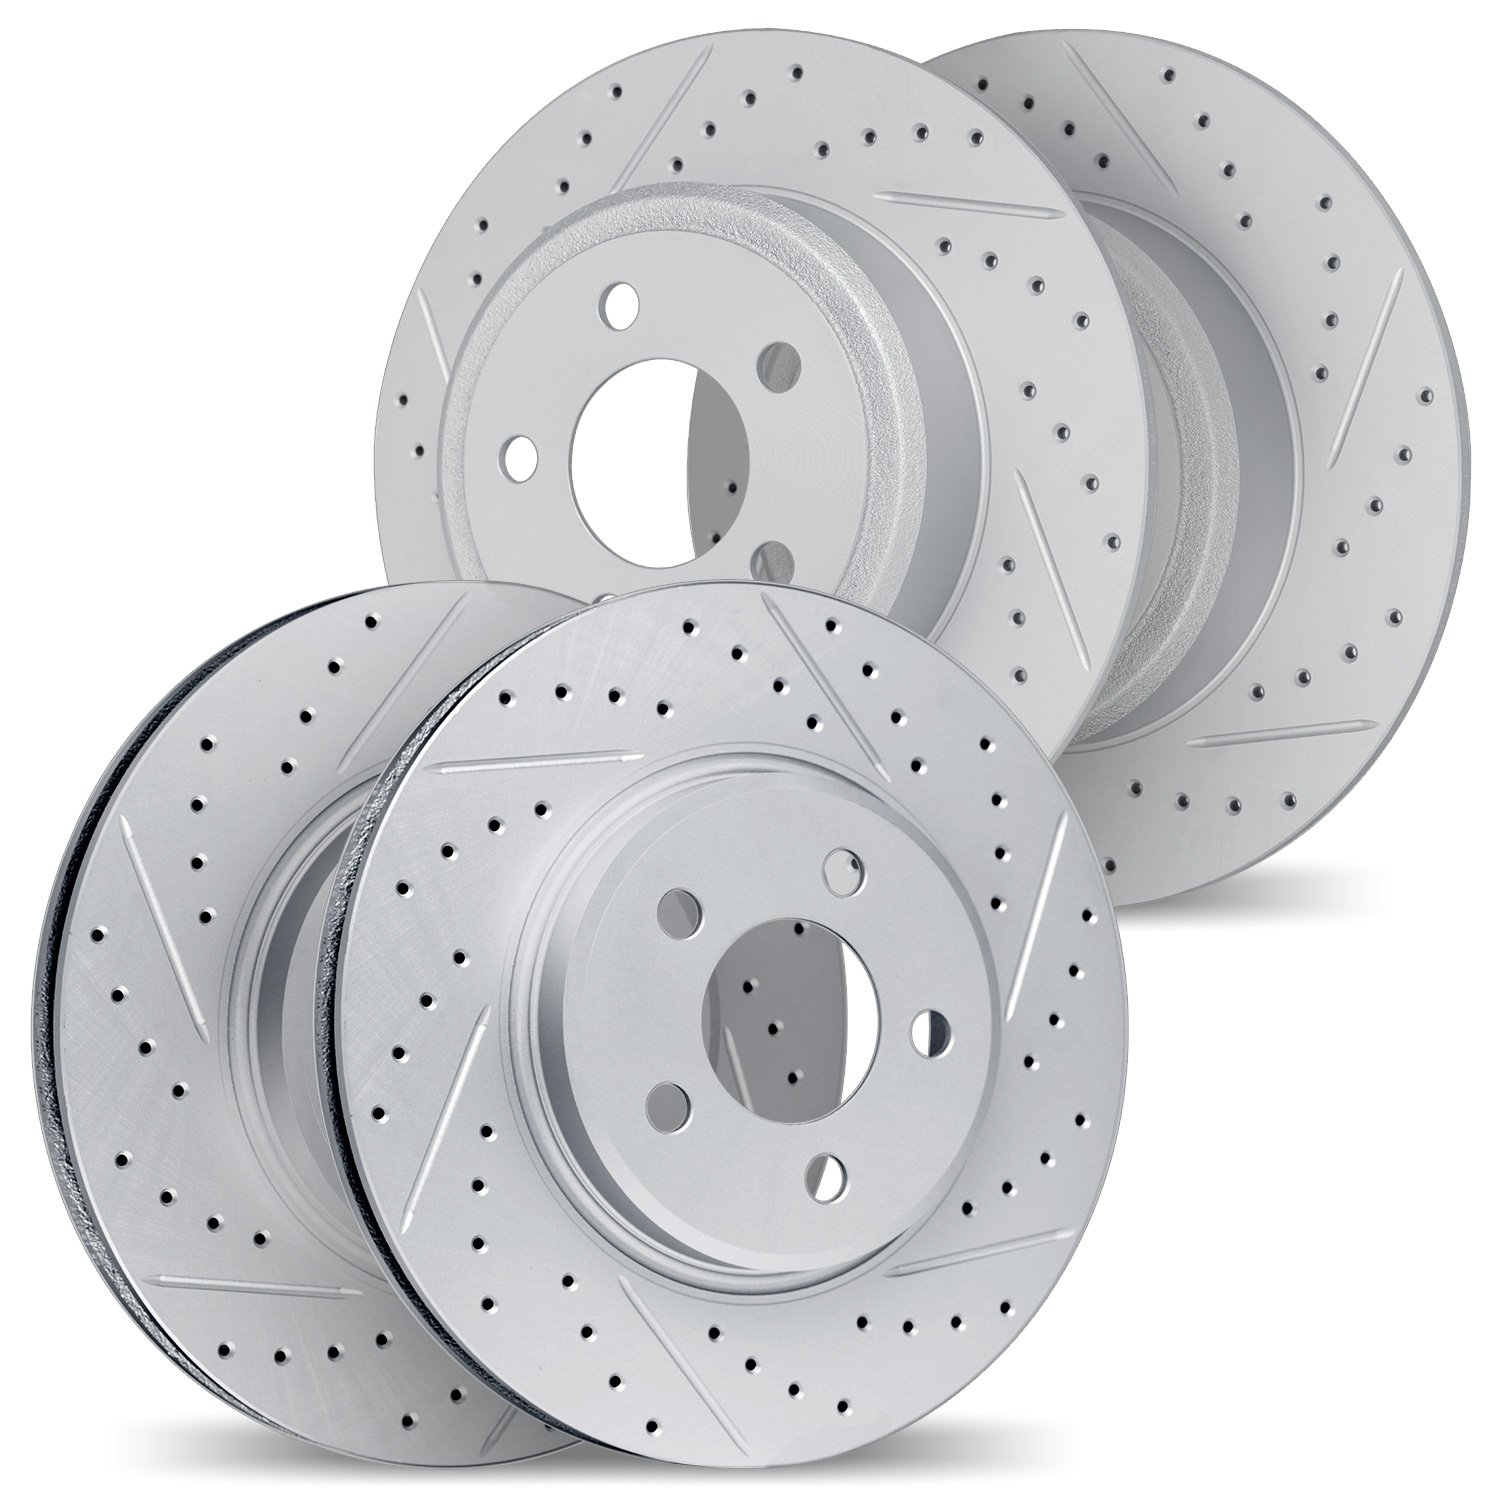 2004-39012 Geoperformance Drilled/Slotted Brake Rotors, 2004-2008 Mopar, Position: Front and Rear